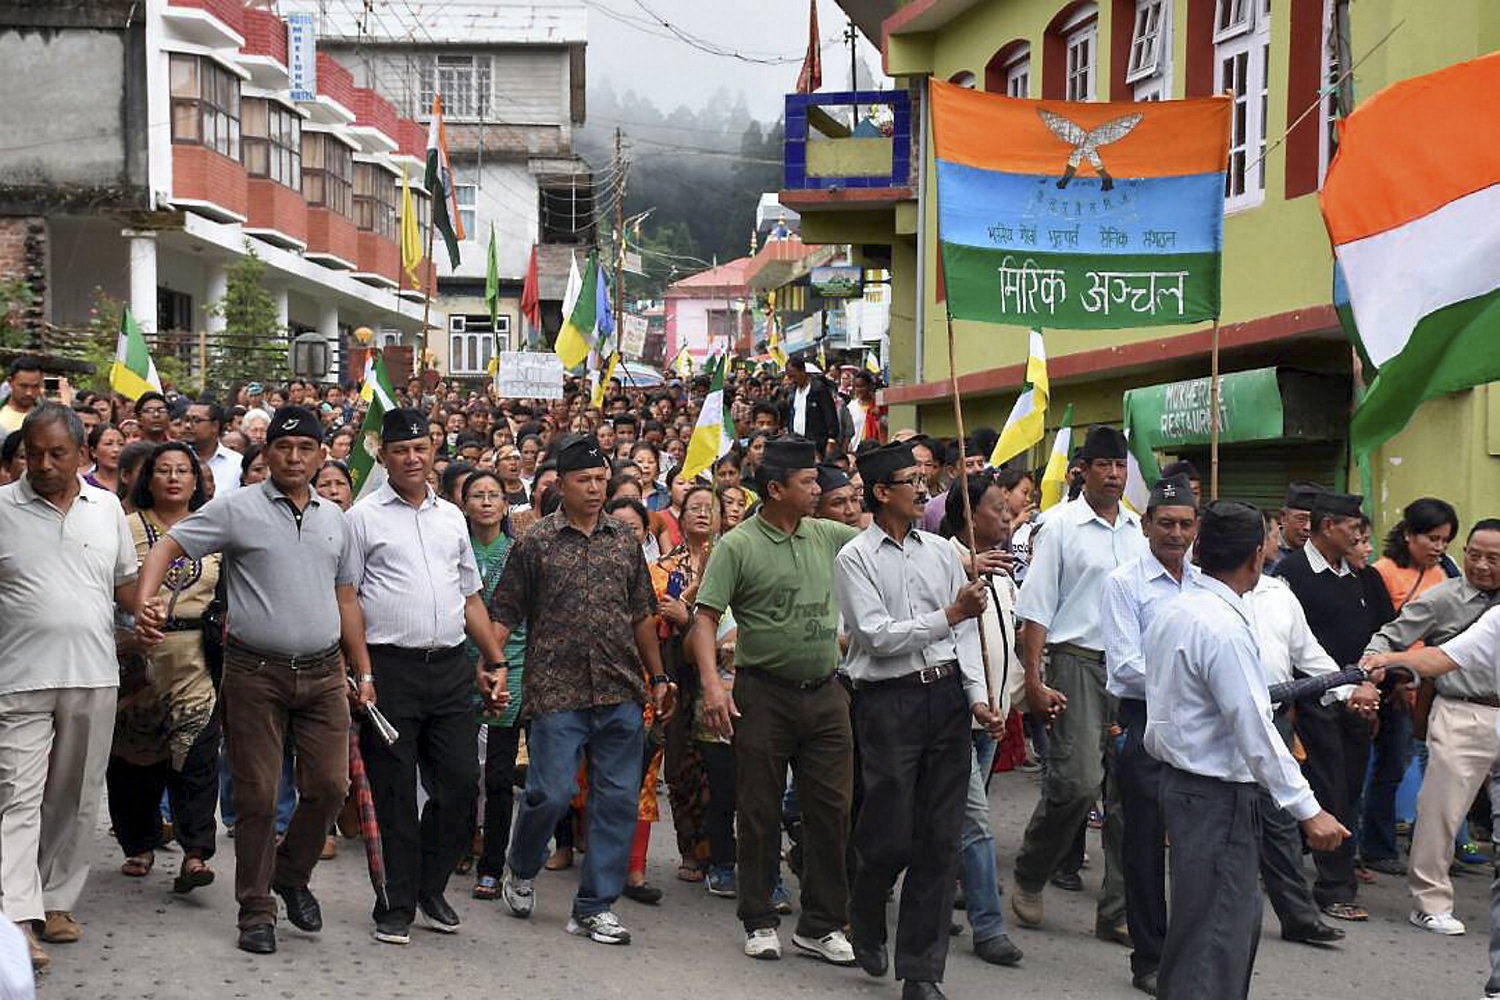 Protest marches held in Darjeeling, normal life crippled